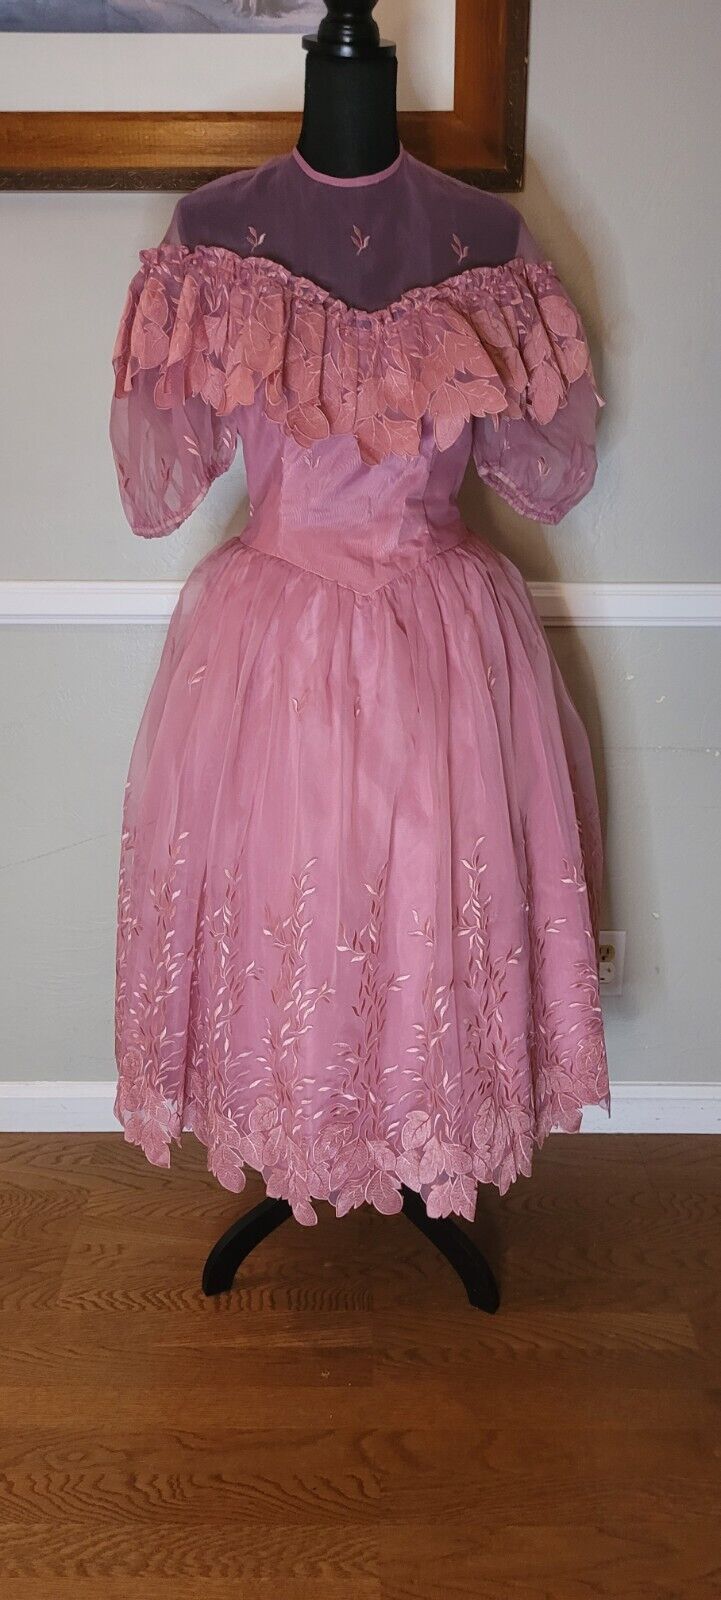 Vintage 1980s Dusty Rose With Whimsical Overlay Skirt